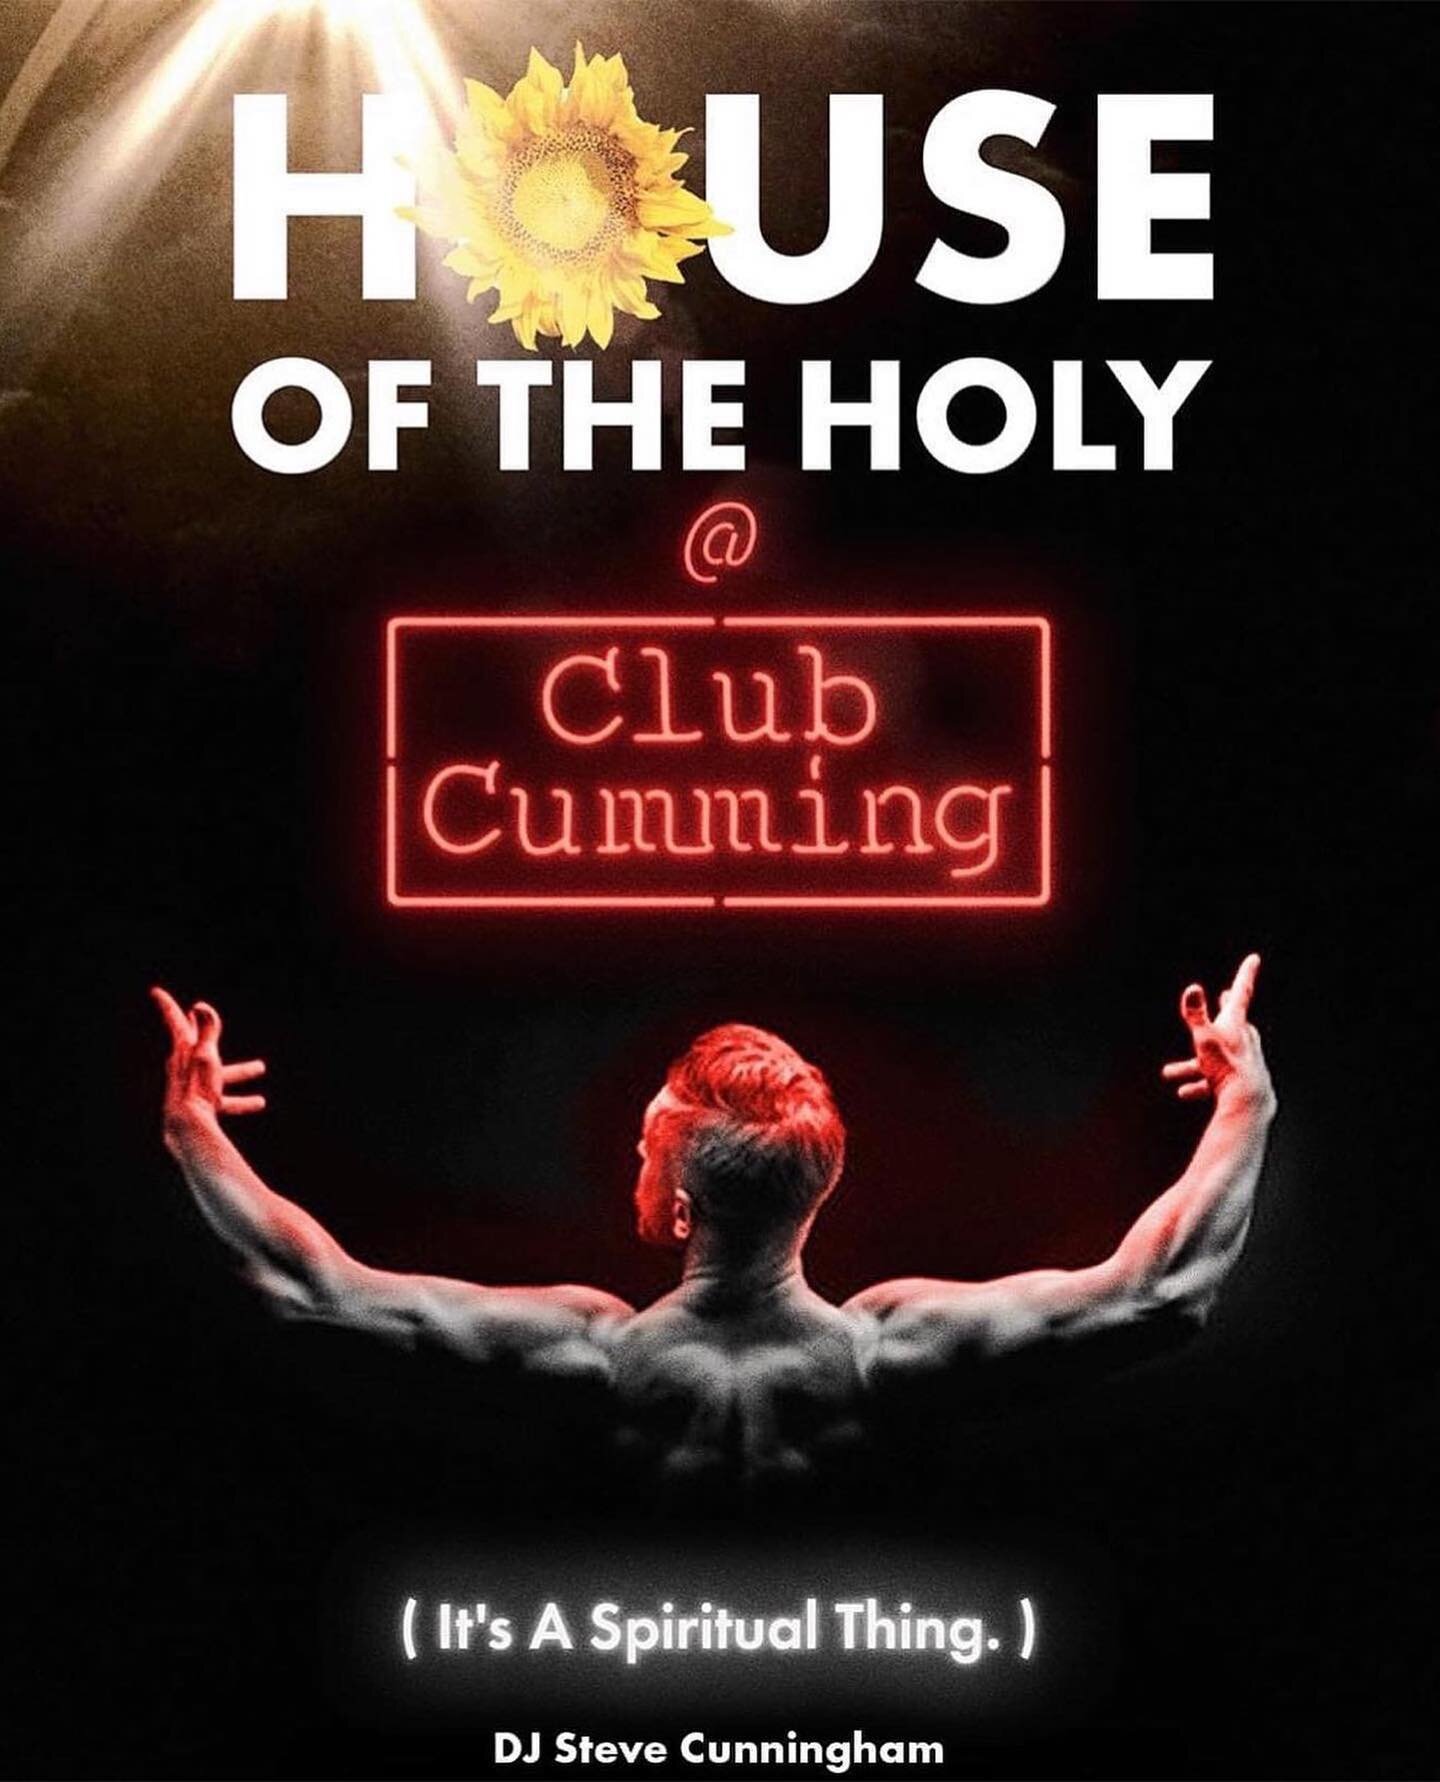 Repost from @stevencunningham1700
&bull;
Tonight  I'm at Club Cumming for House Of The Holy.  I'll be picking things up right after the stand up comedy show &quot;2 Gays, 1 Mic&quot; which begins at 8:30PM.  Come on through and celebrate your hump da